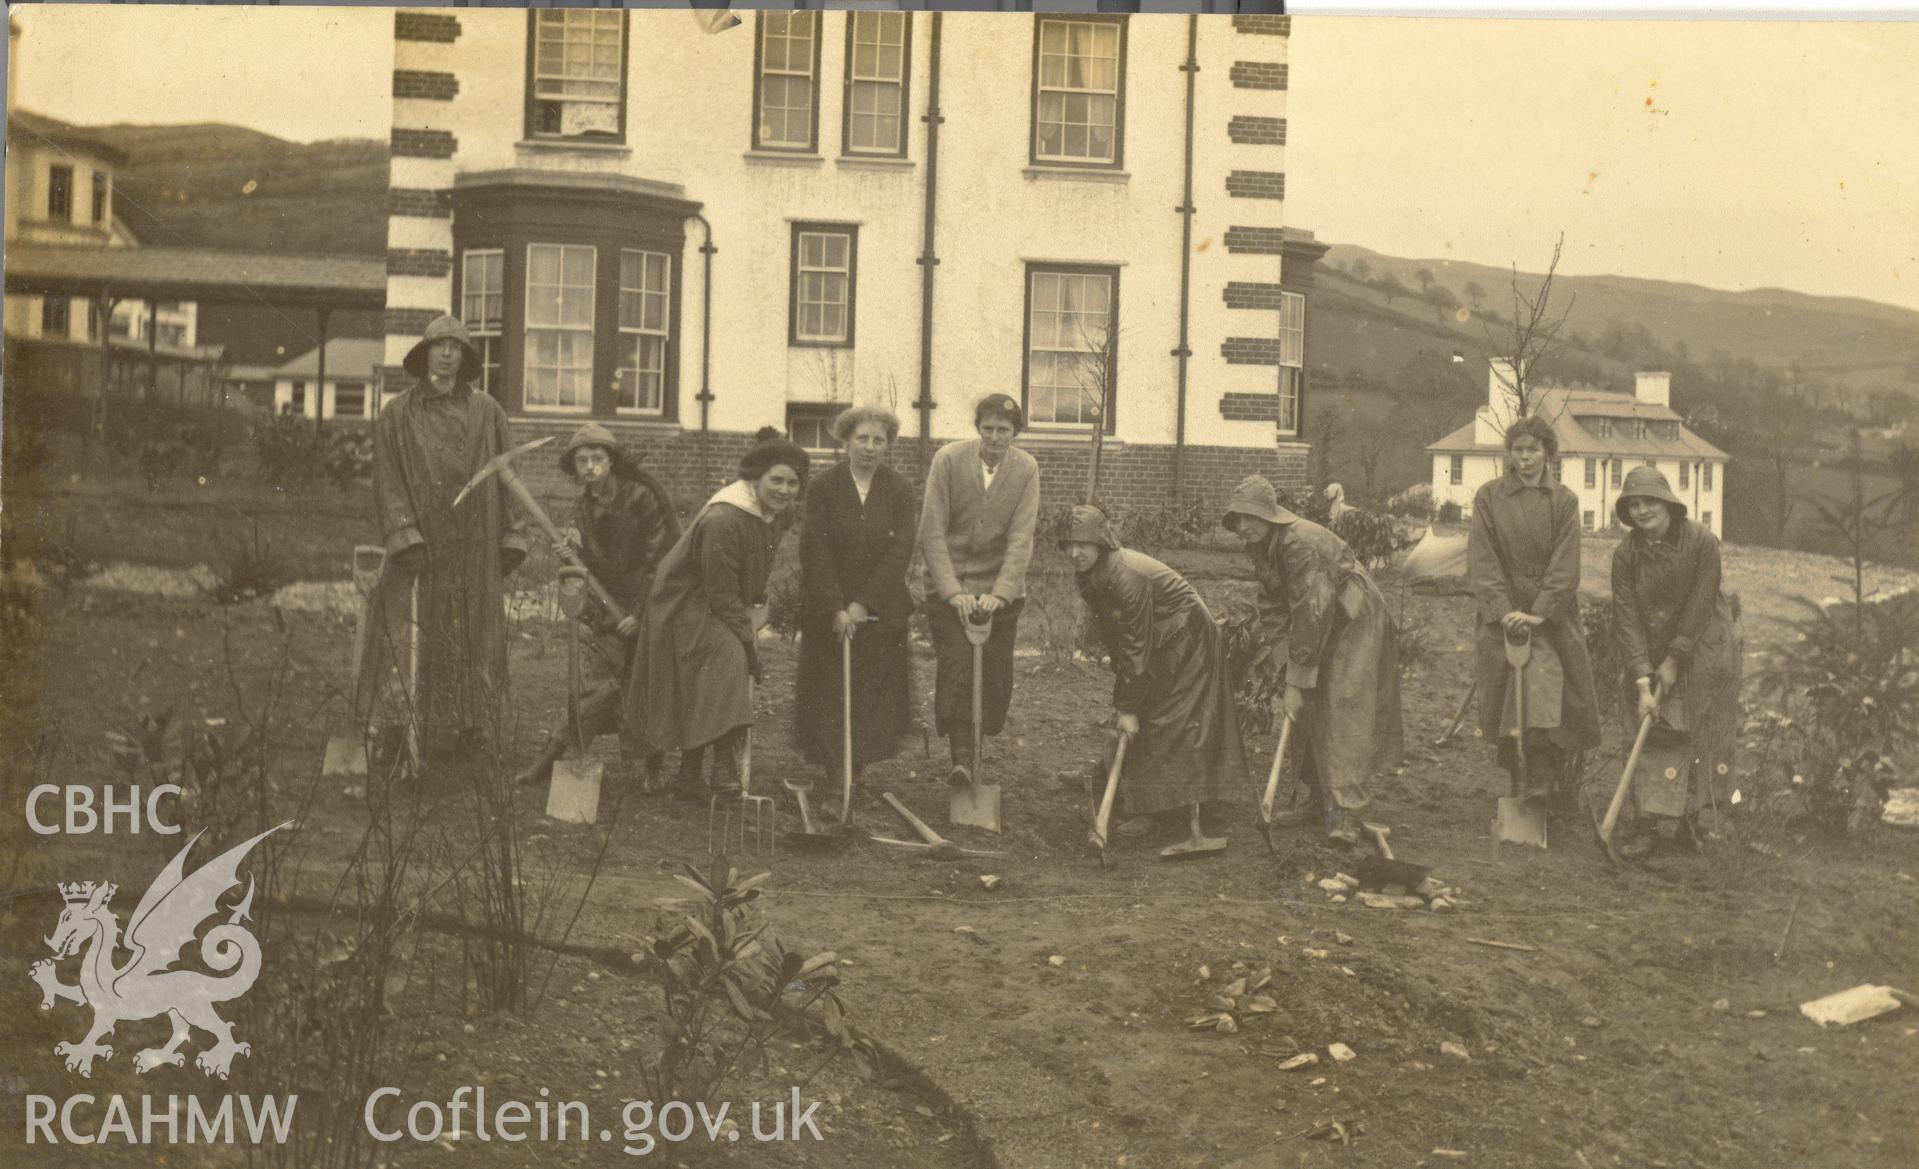 Digitised postcard image of a group of 'Land Girls' gardening at Llangwyfan Hospital, Llandynog. Produced by Parks and Gardens Data Services, from an original item in the Peter Davis Collection at Parks and Gardens UK. We hold only web-resolution images of this collection, suitable for viewing on screen and for research purposes only. We do not hold the original images, or publication quality scans.